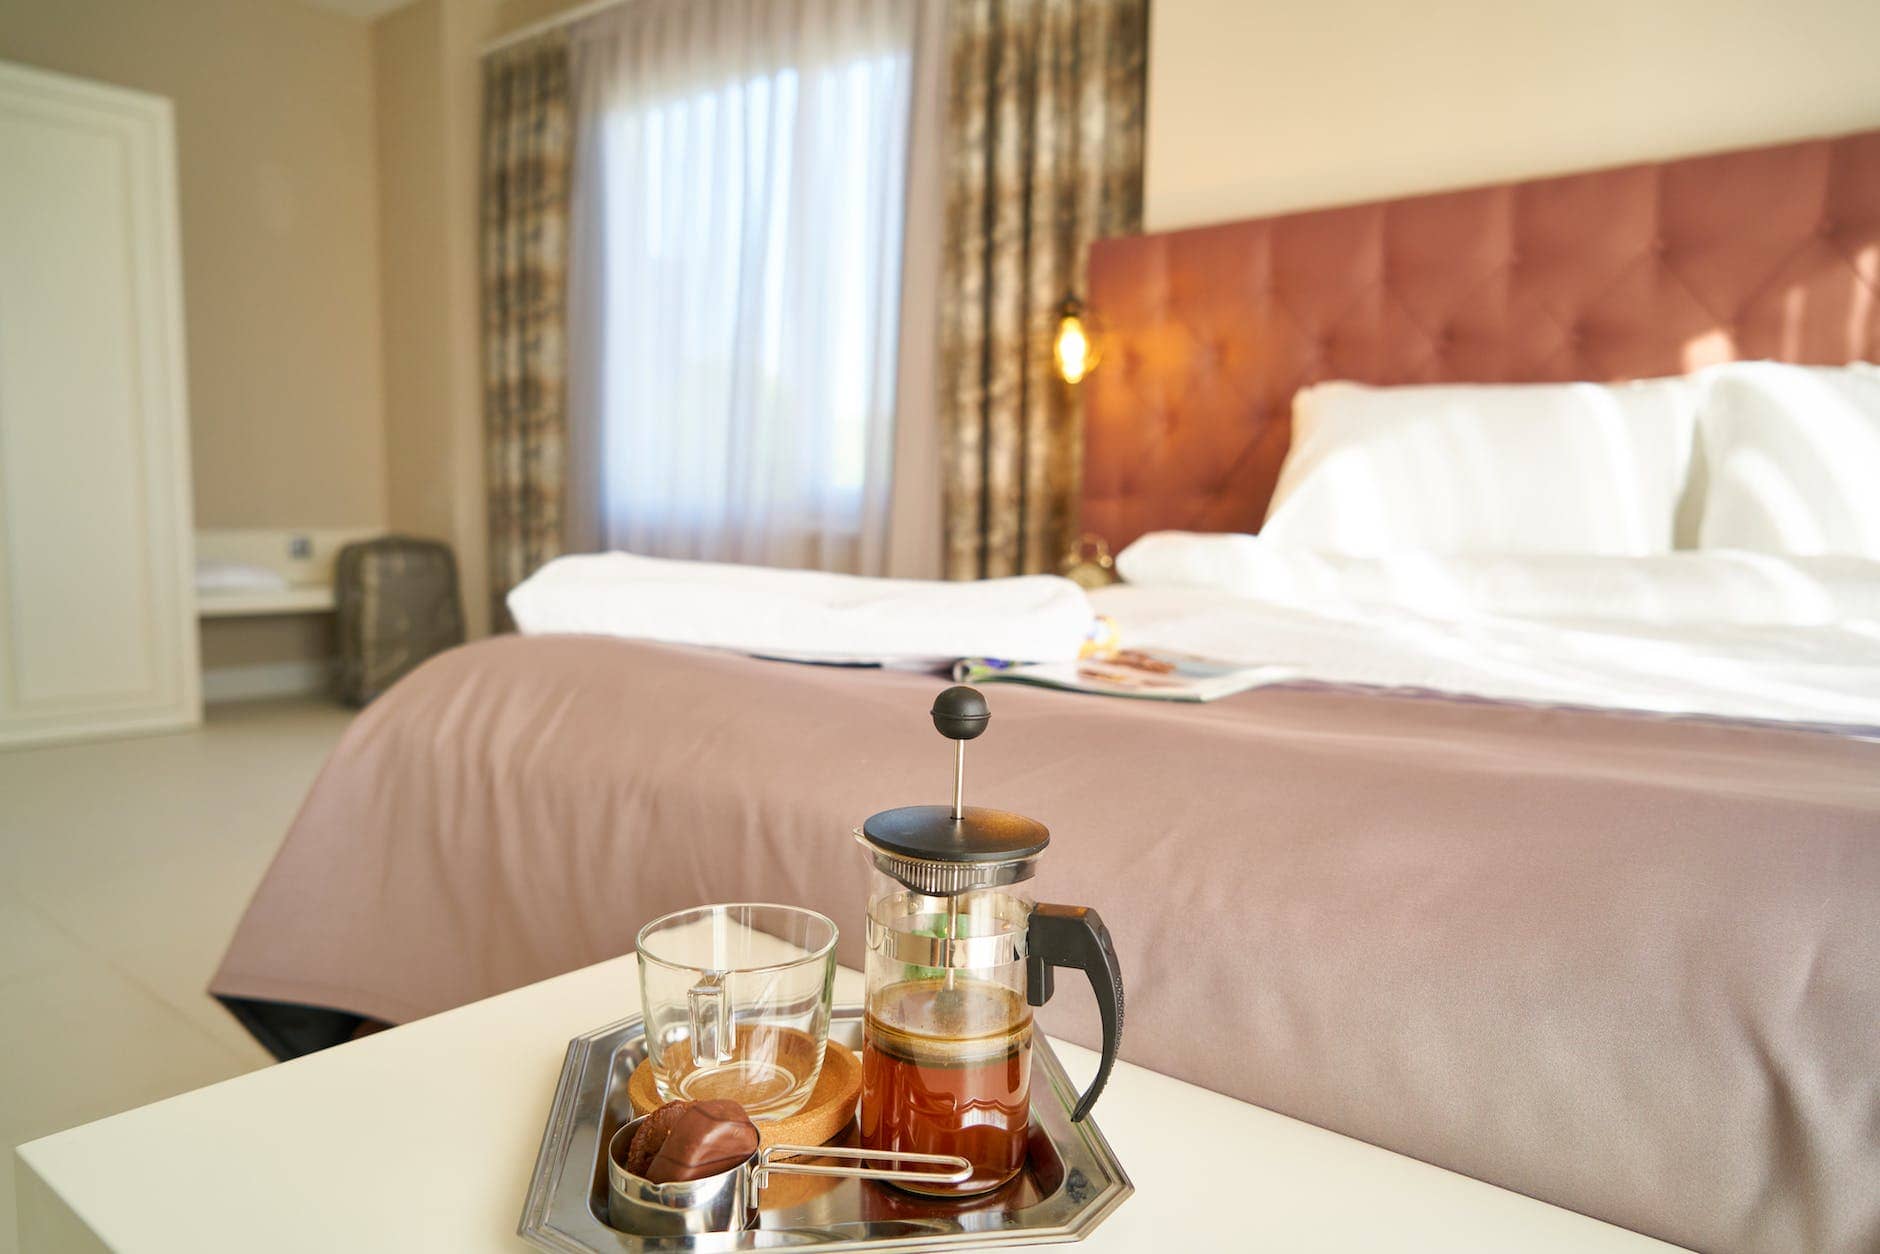 empty bed near table with tea - hotel guest experience